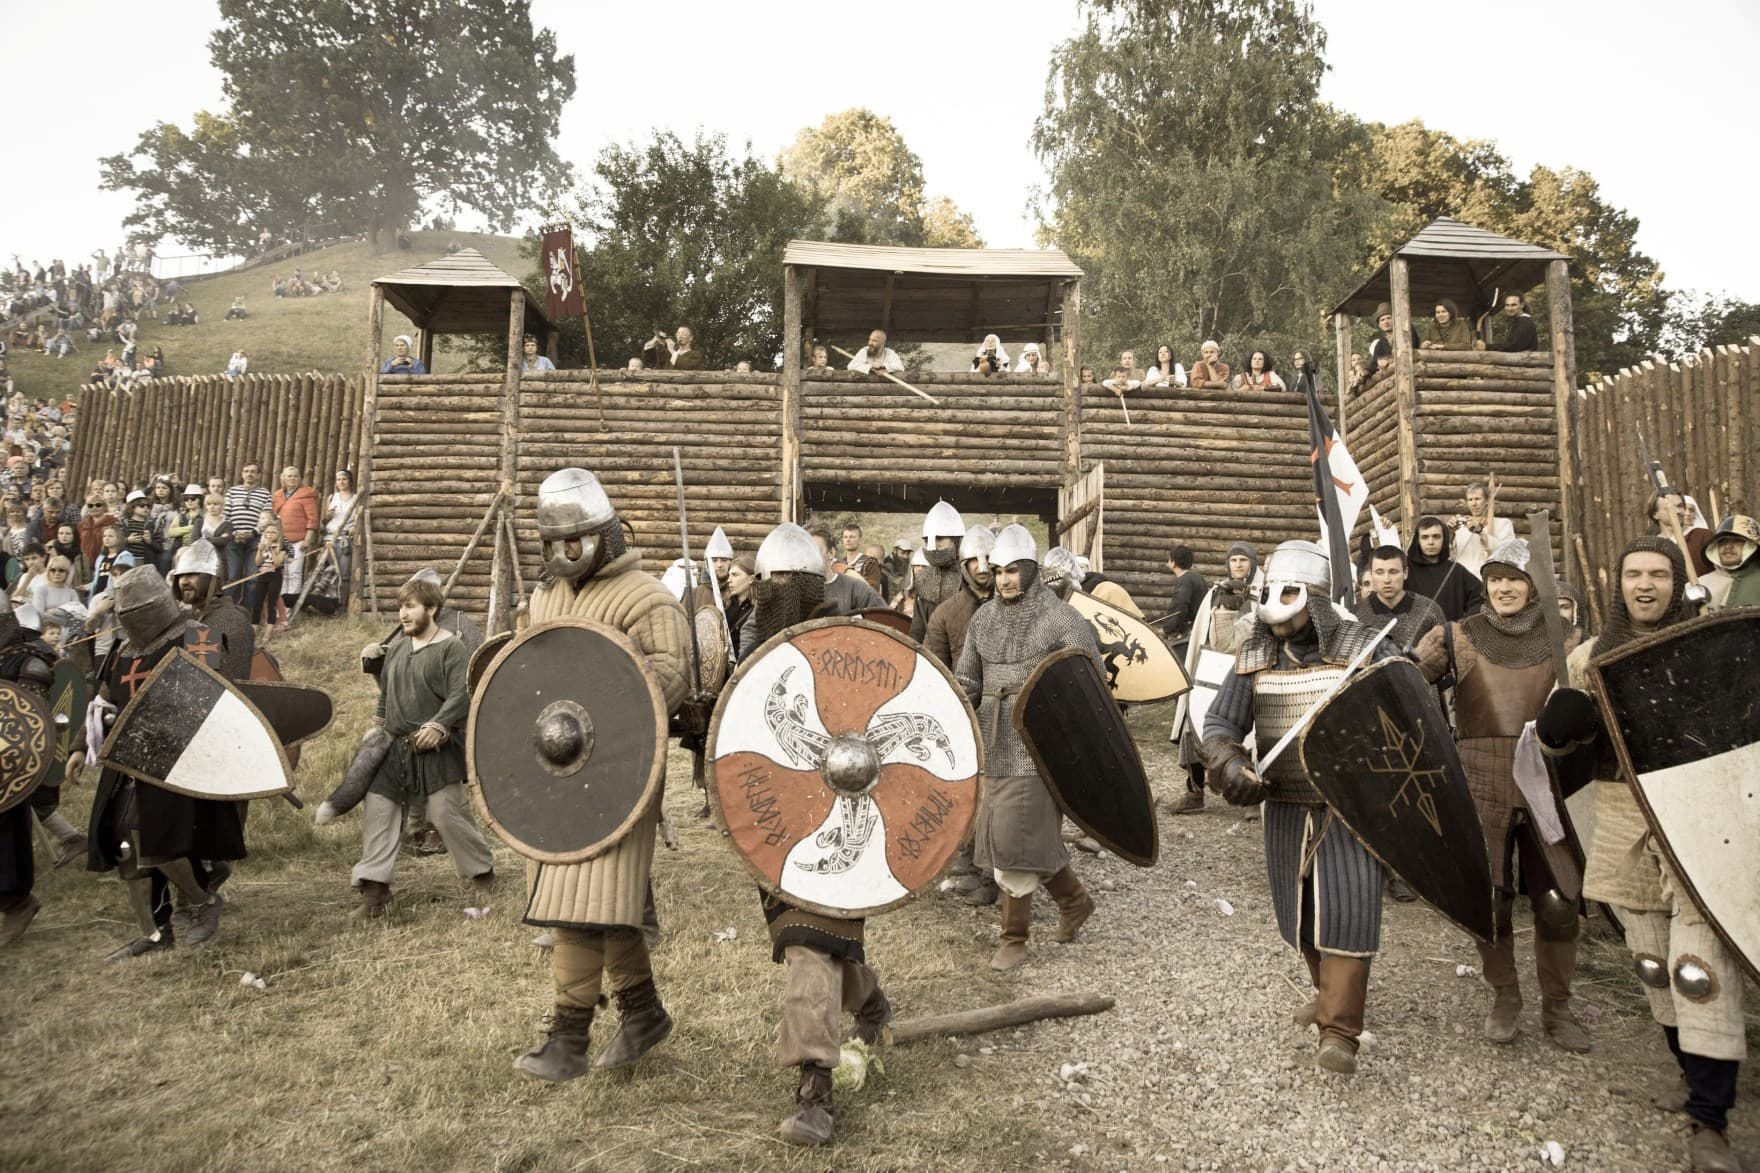 Medieval archery in the medieval festival in Lithuania